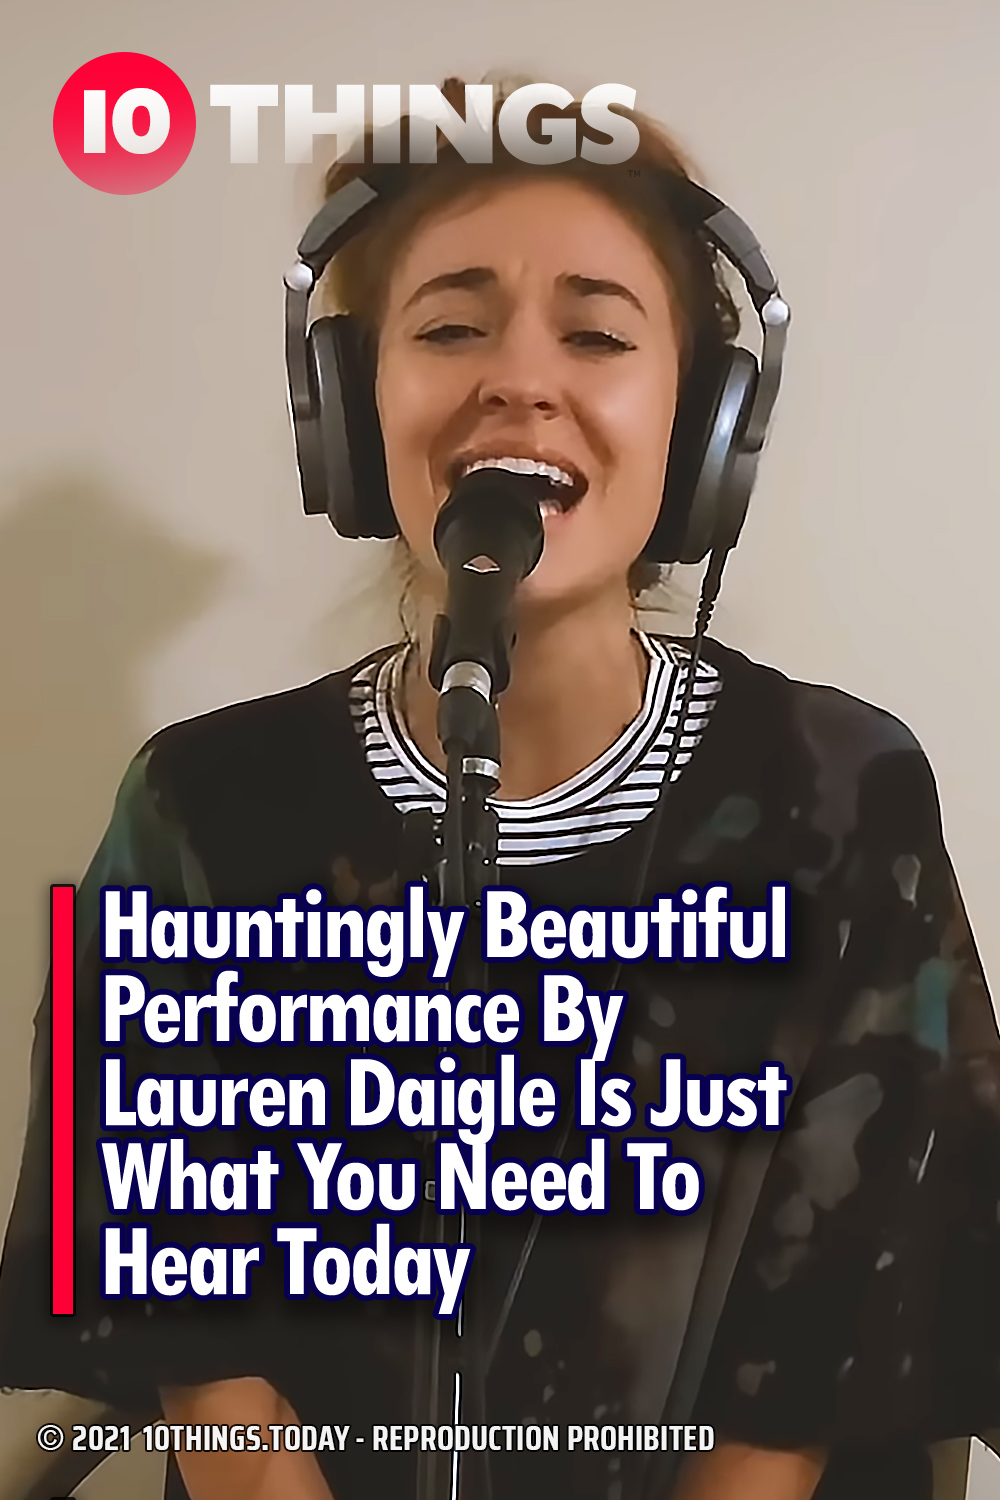 Hauntingly Beautiful Performance By Lauren Daigle Is Just What You Need To Hear Today